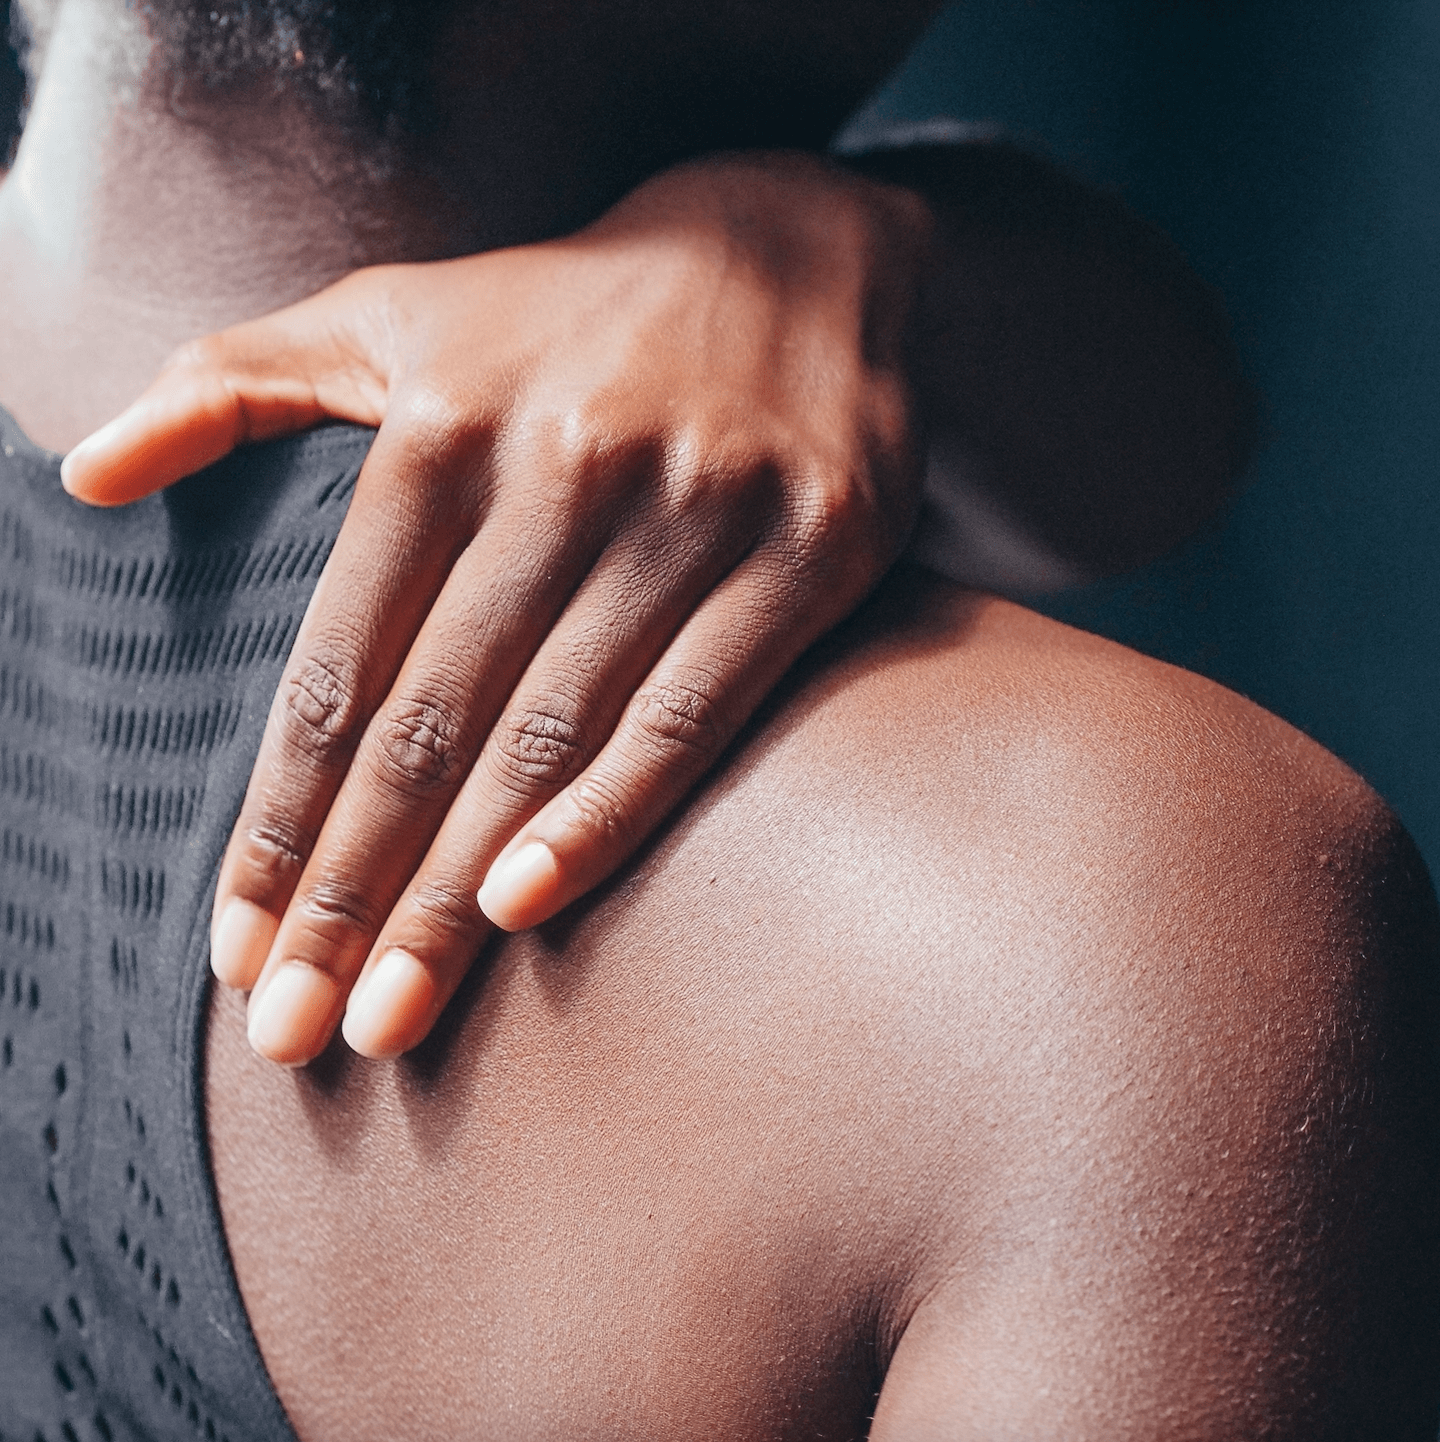 Does CBD Cream Work for Joint Pains?